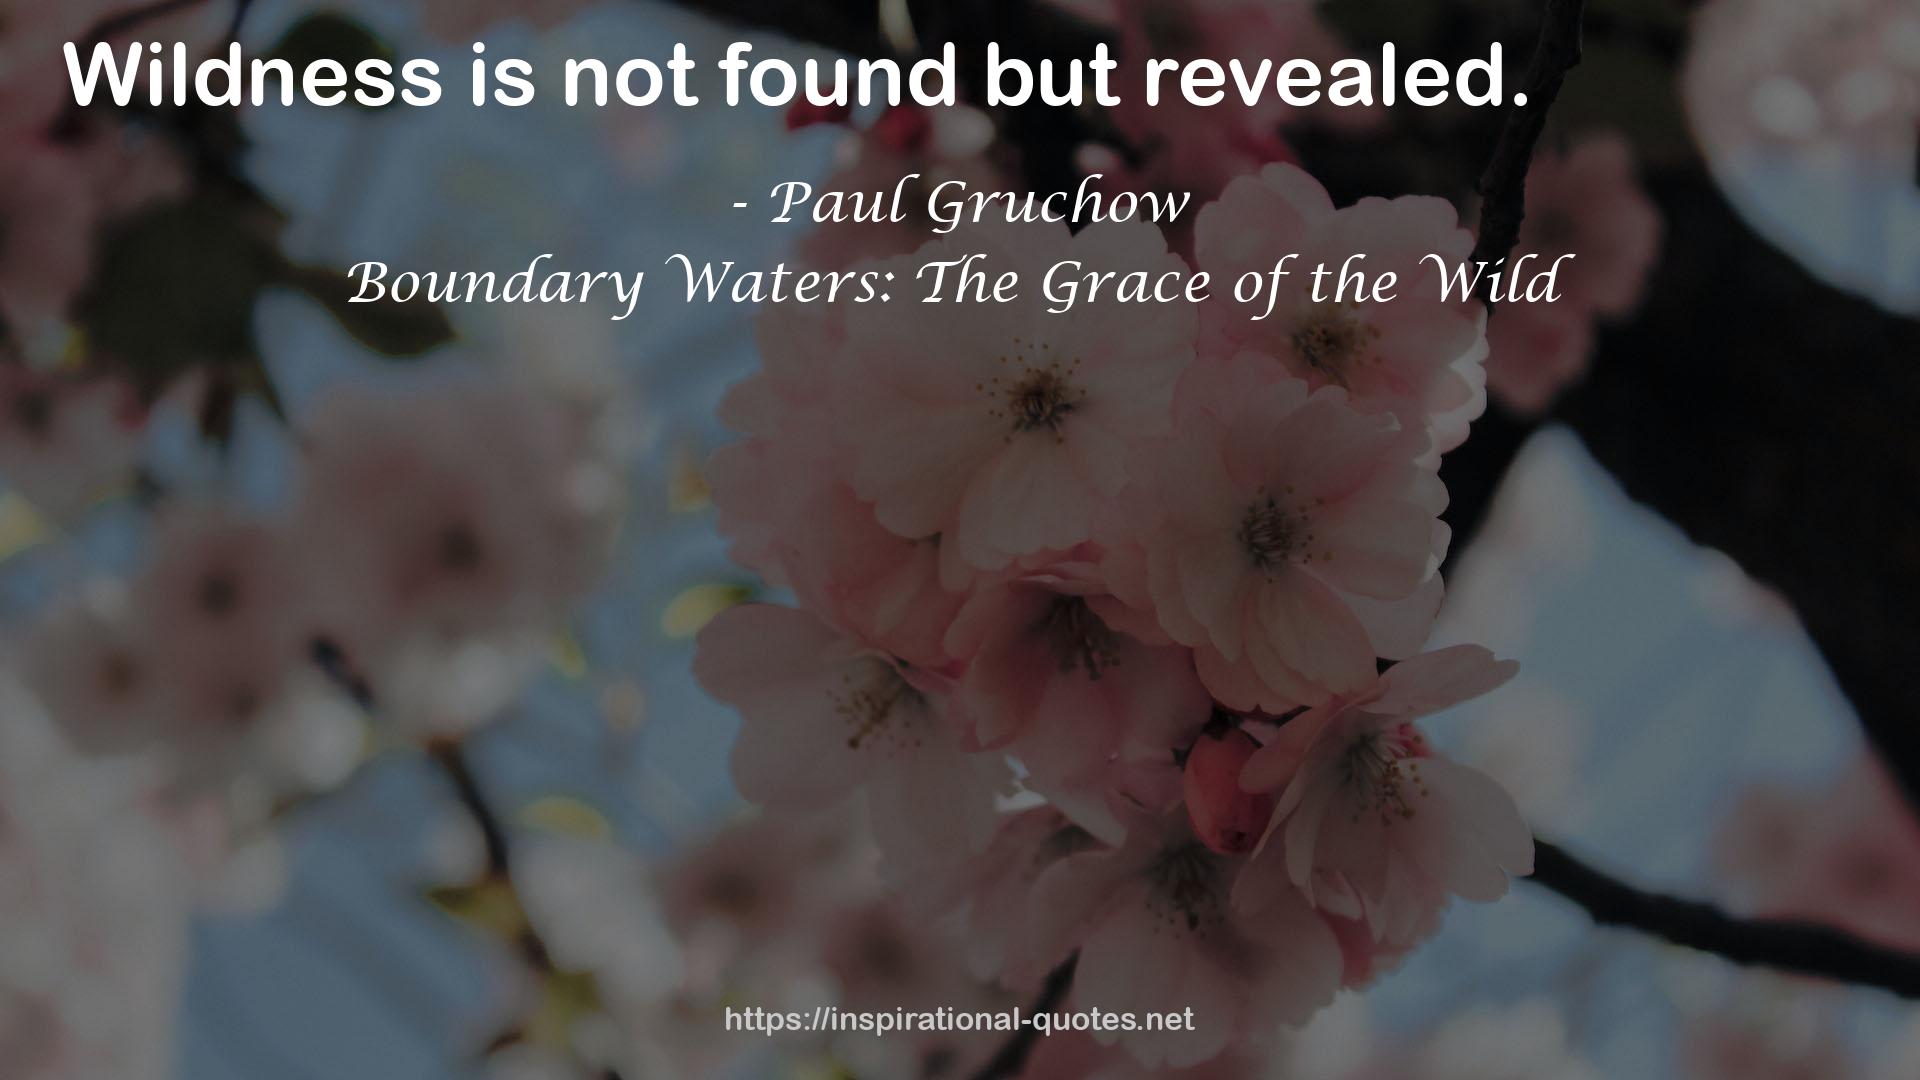 Boundary Waters: The Grace of the Wild QUOTES